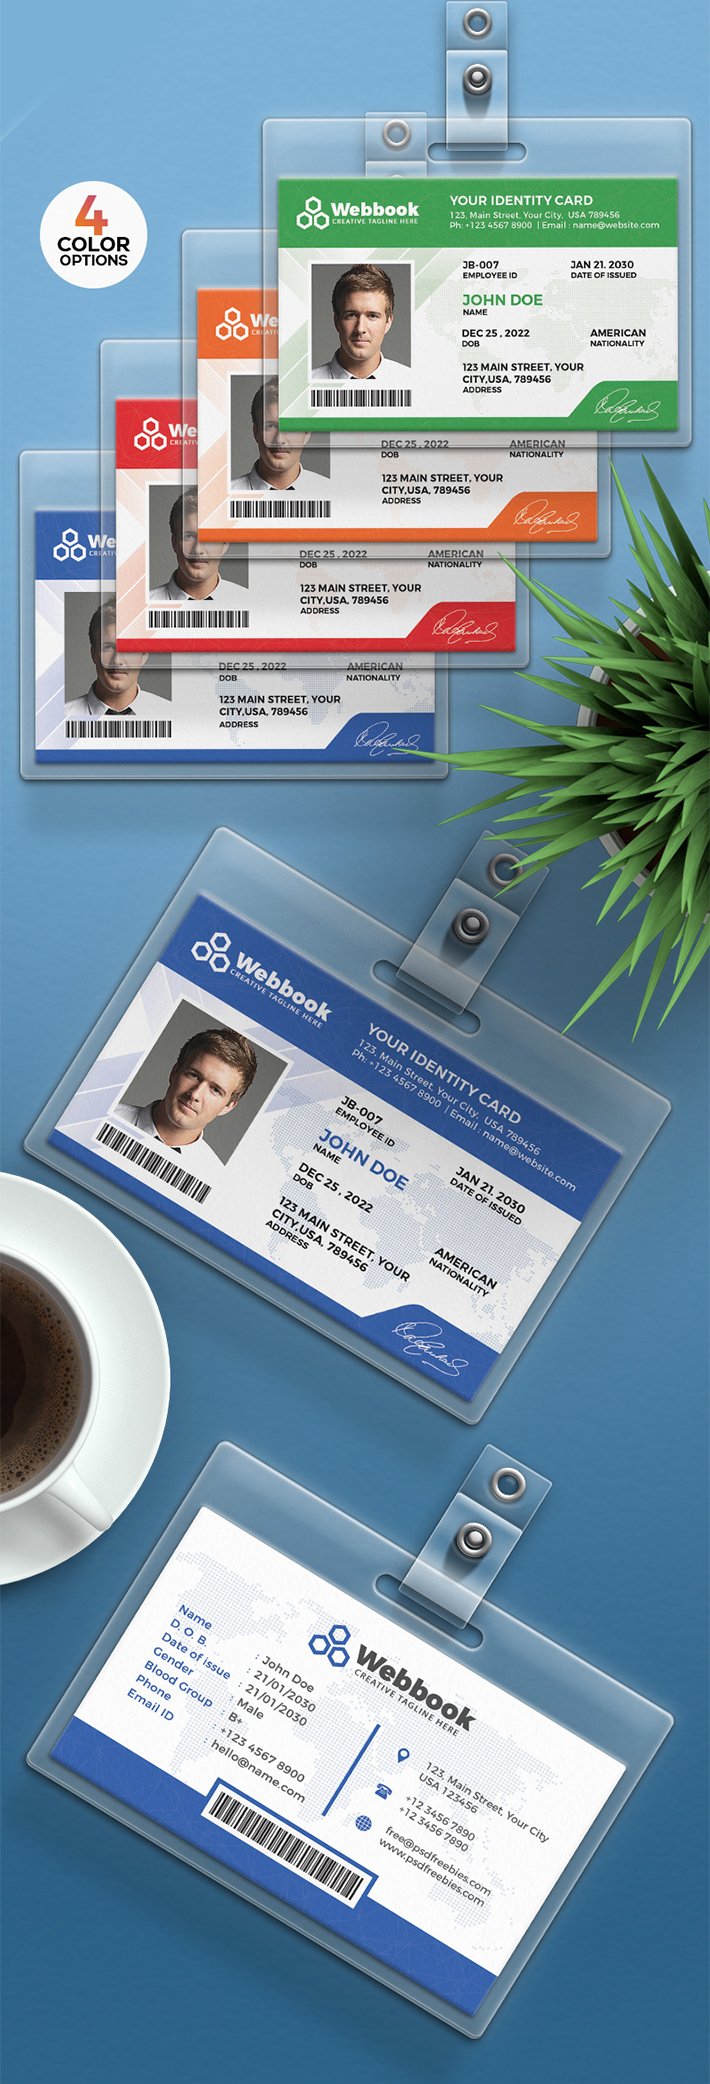 Creative ID Card PSD Template Free Download (in 4 Colors)